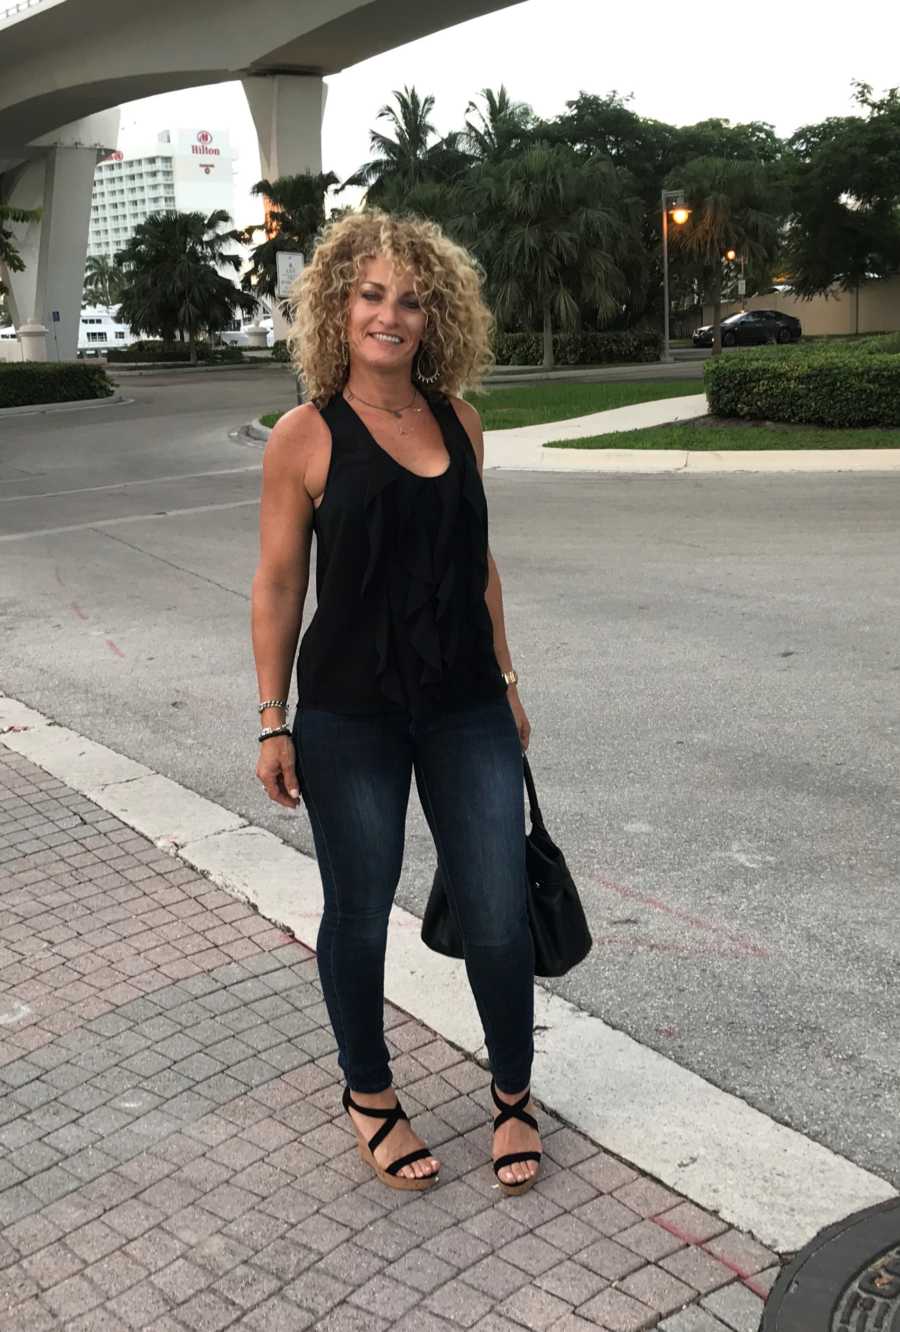 Woman who became sober stands smiling in cross walk holding purse